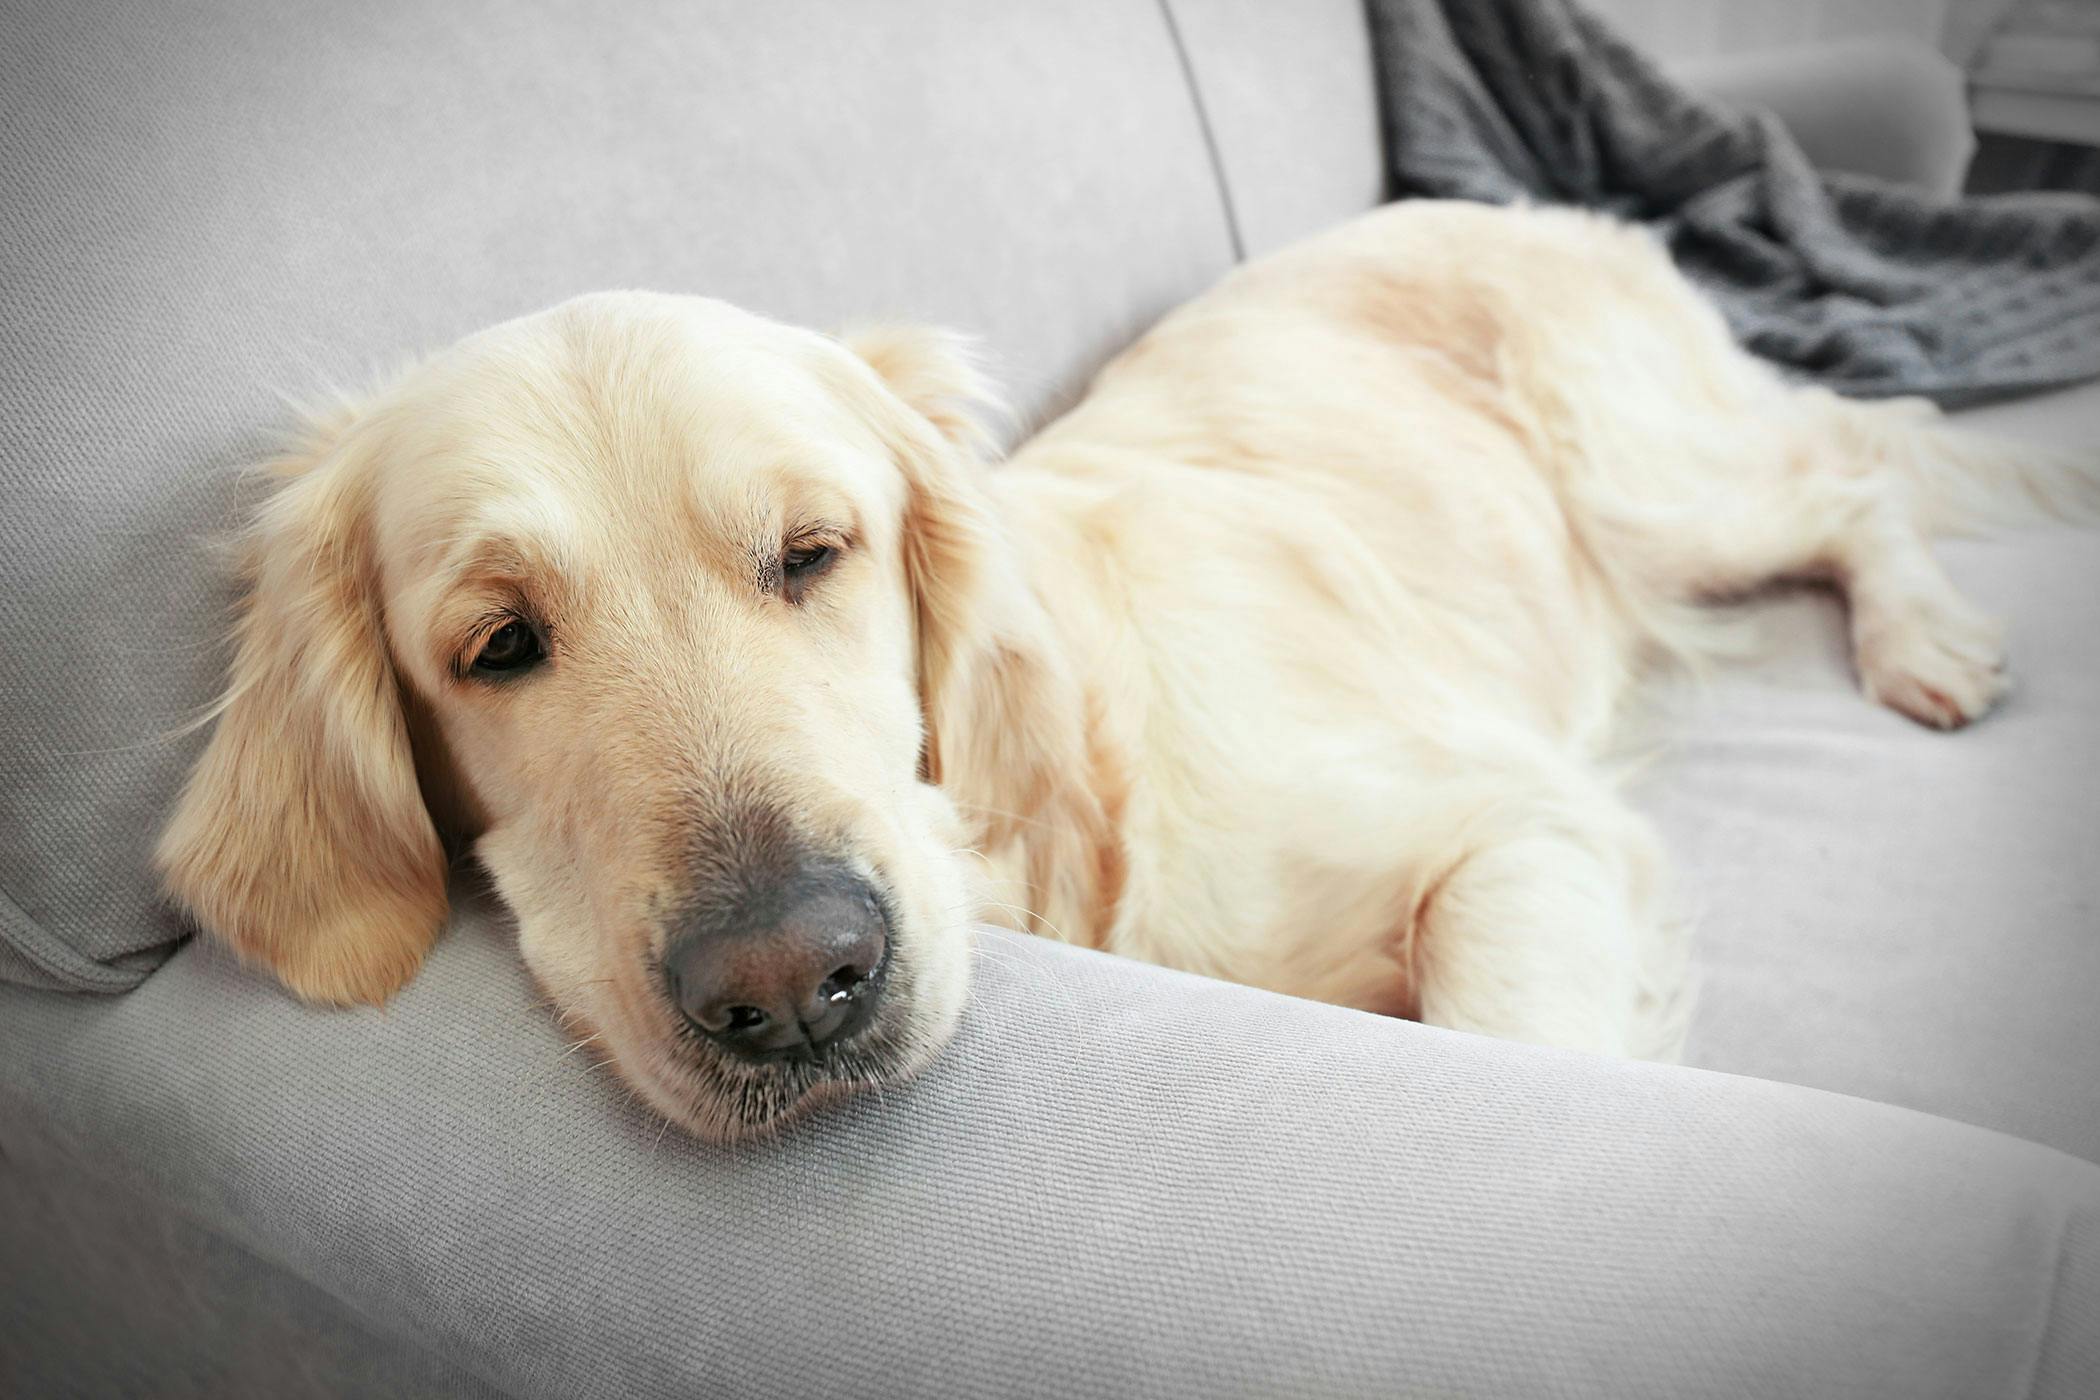 are dog bacterial infections contagious to other dogs